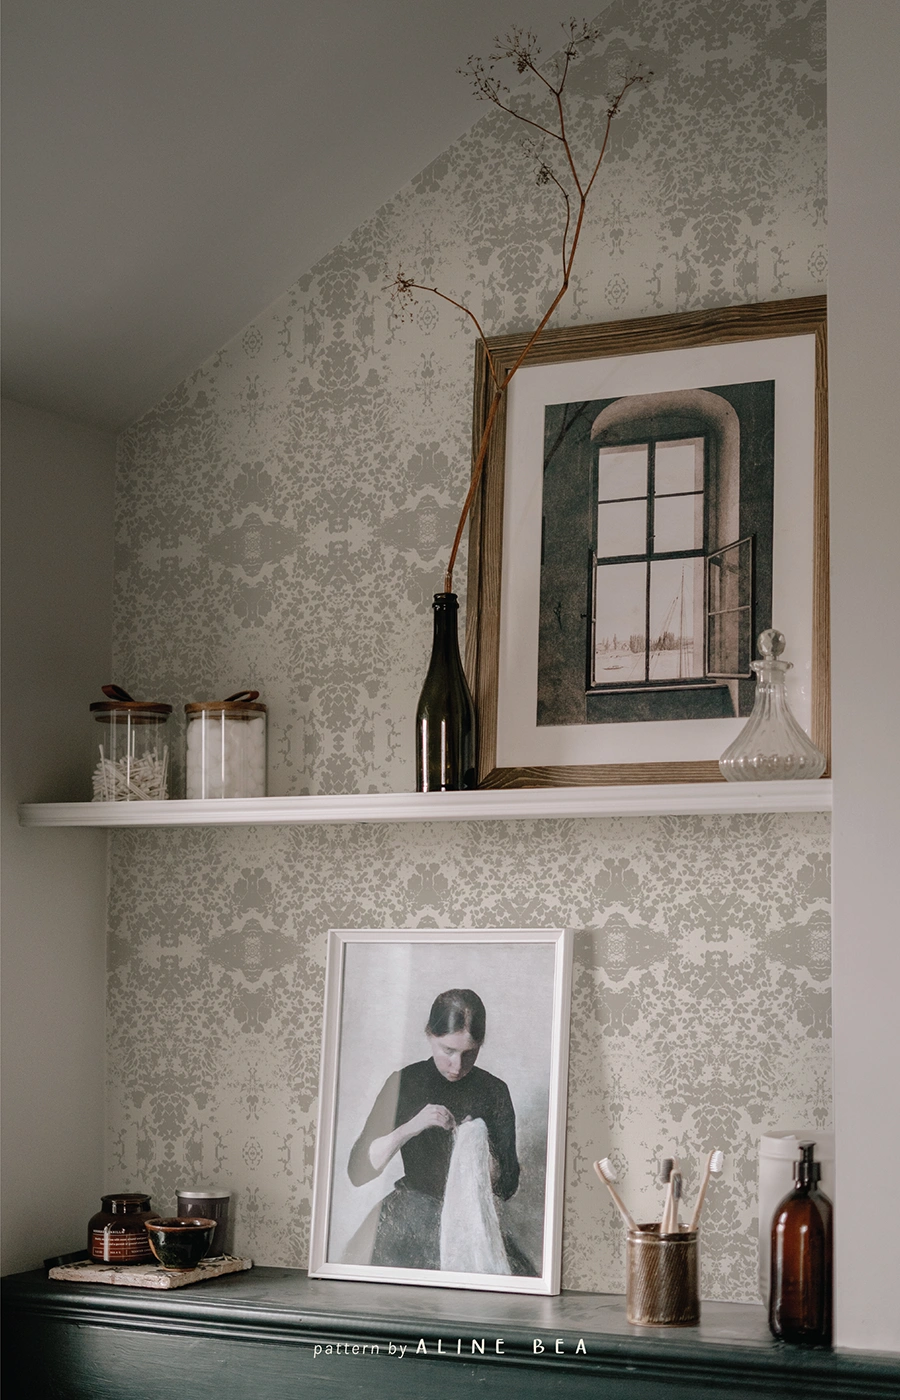 A section of a vintage cabinet on bottom, with a framed picture of a woman sewing and small decorative objects on top. A shelf in the middle of the picture, with a wood frame, a vase and more decorative objects on top. Everything is brought together by the wall with a damask-like wallpaper in the background.